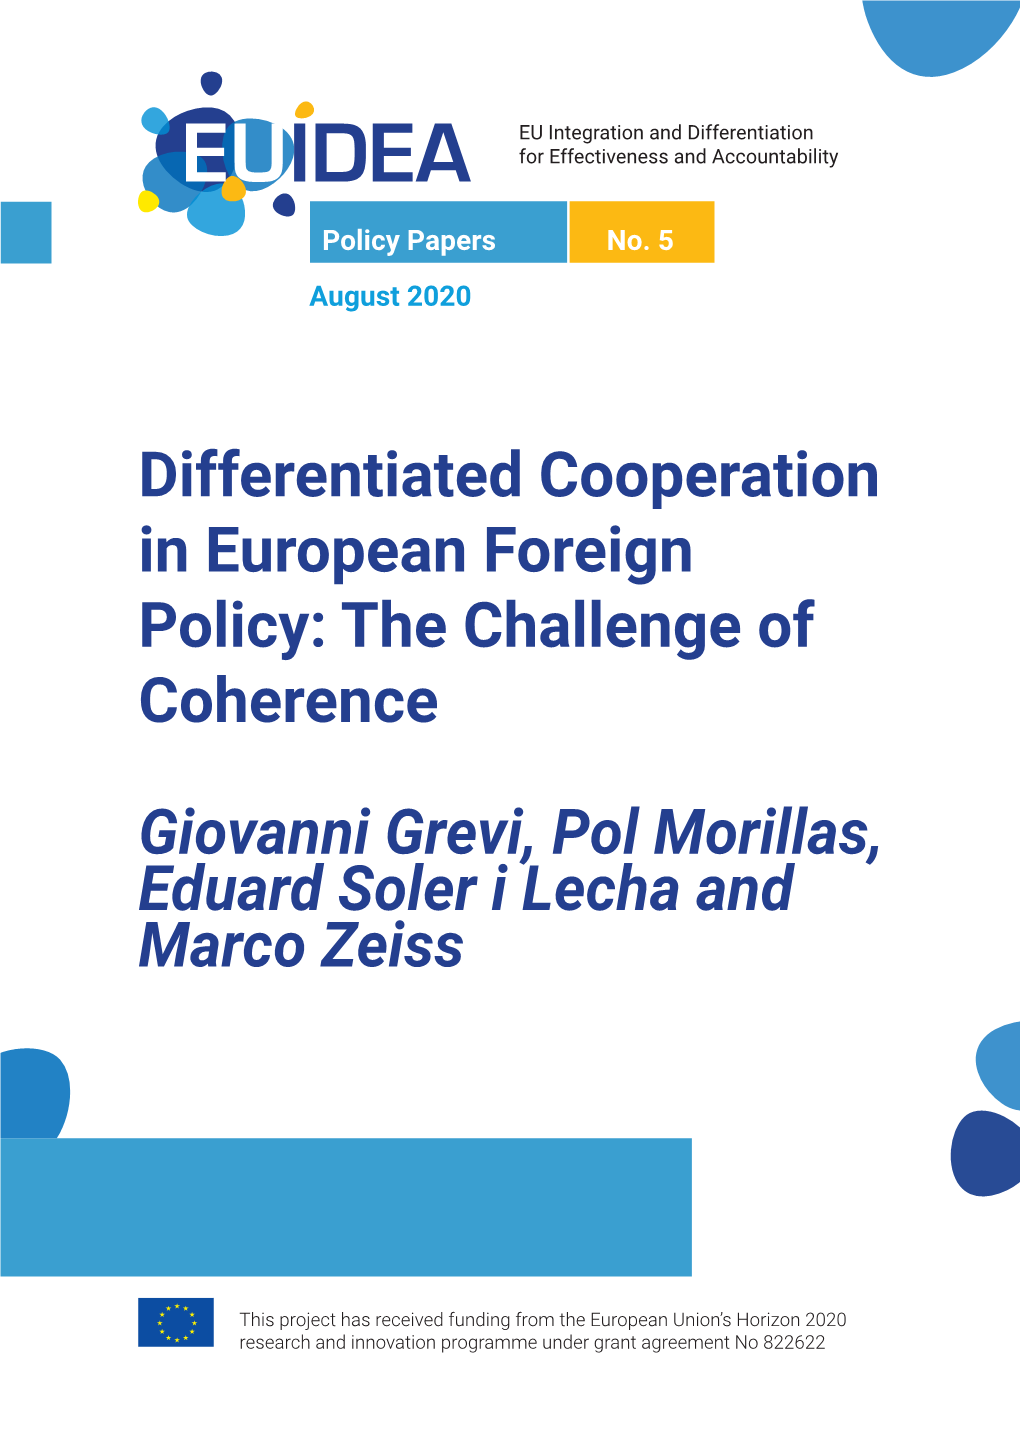 Differentiated Cooperation in European Foreign Policy: the Challenge of Coherence